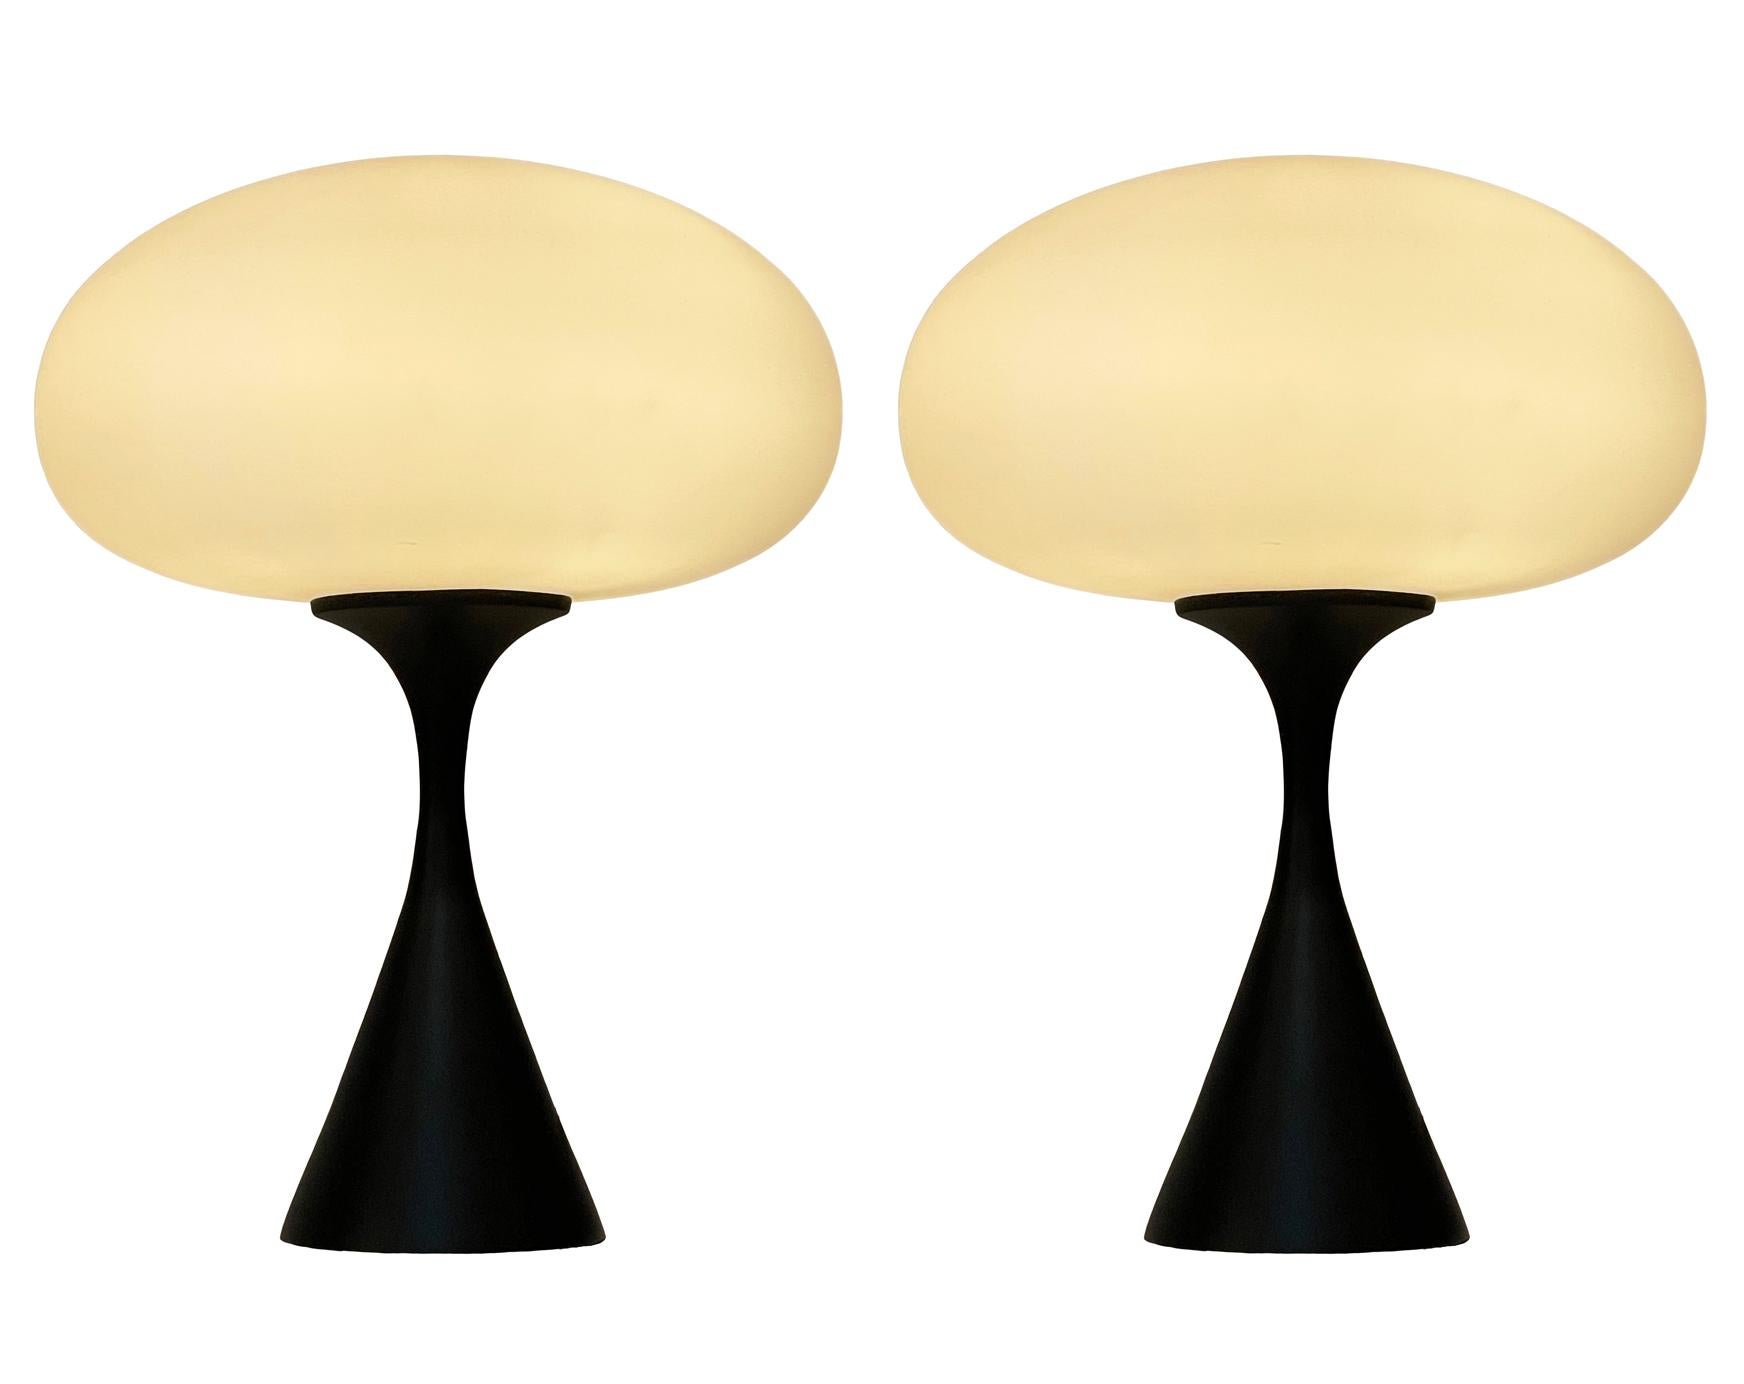 Pair of Mid-Century Modern Table Lamps by Designline in Black & White Glass In New Condition For Sale In Philadelphia, PA